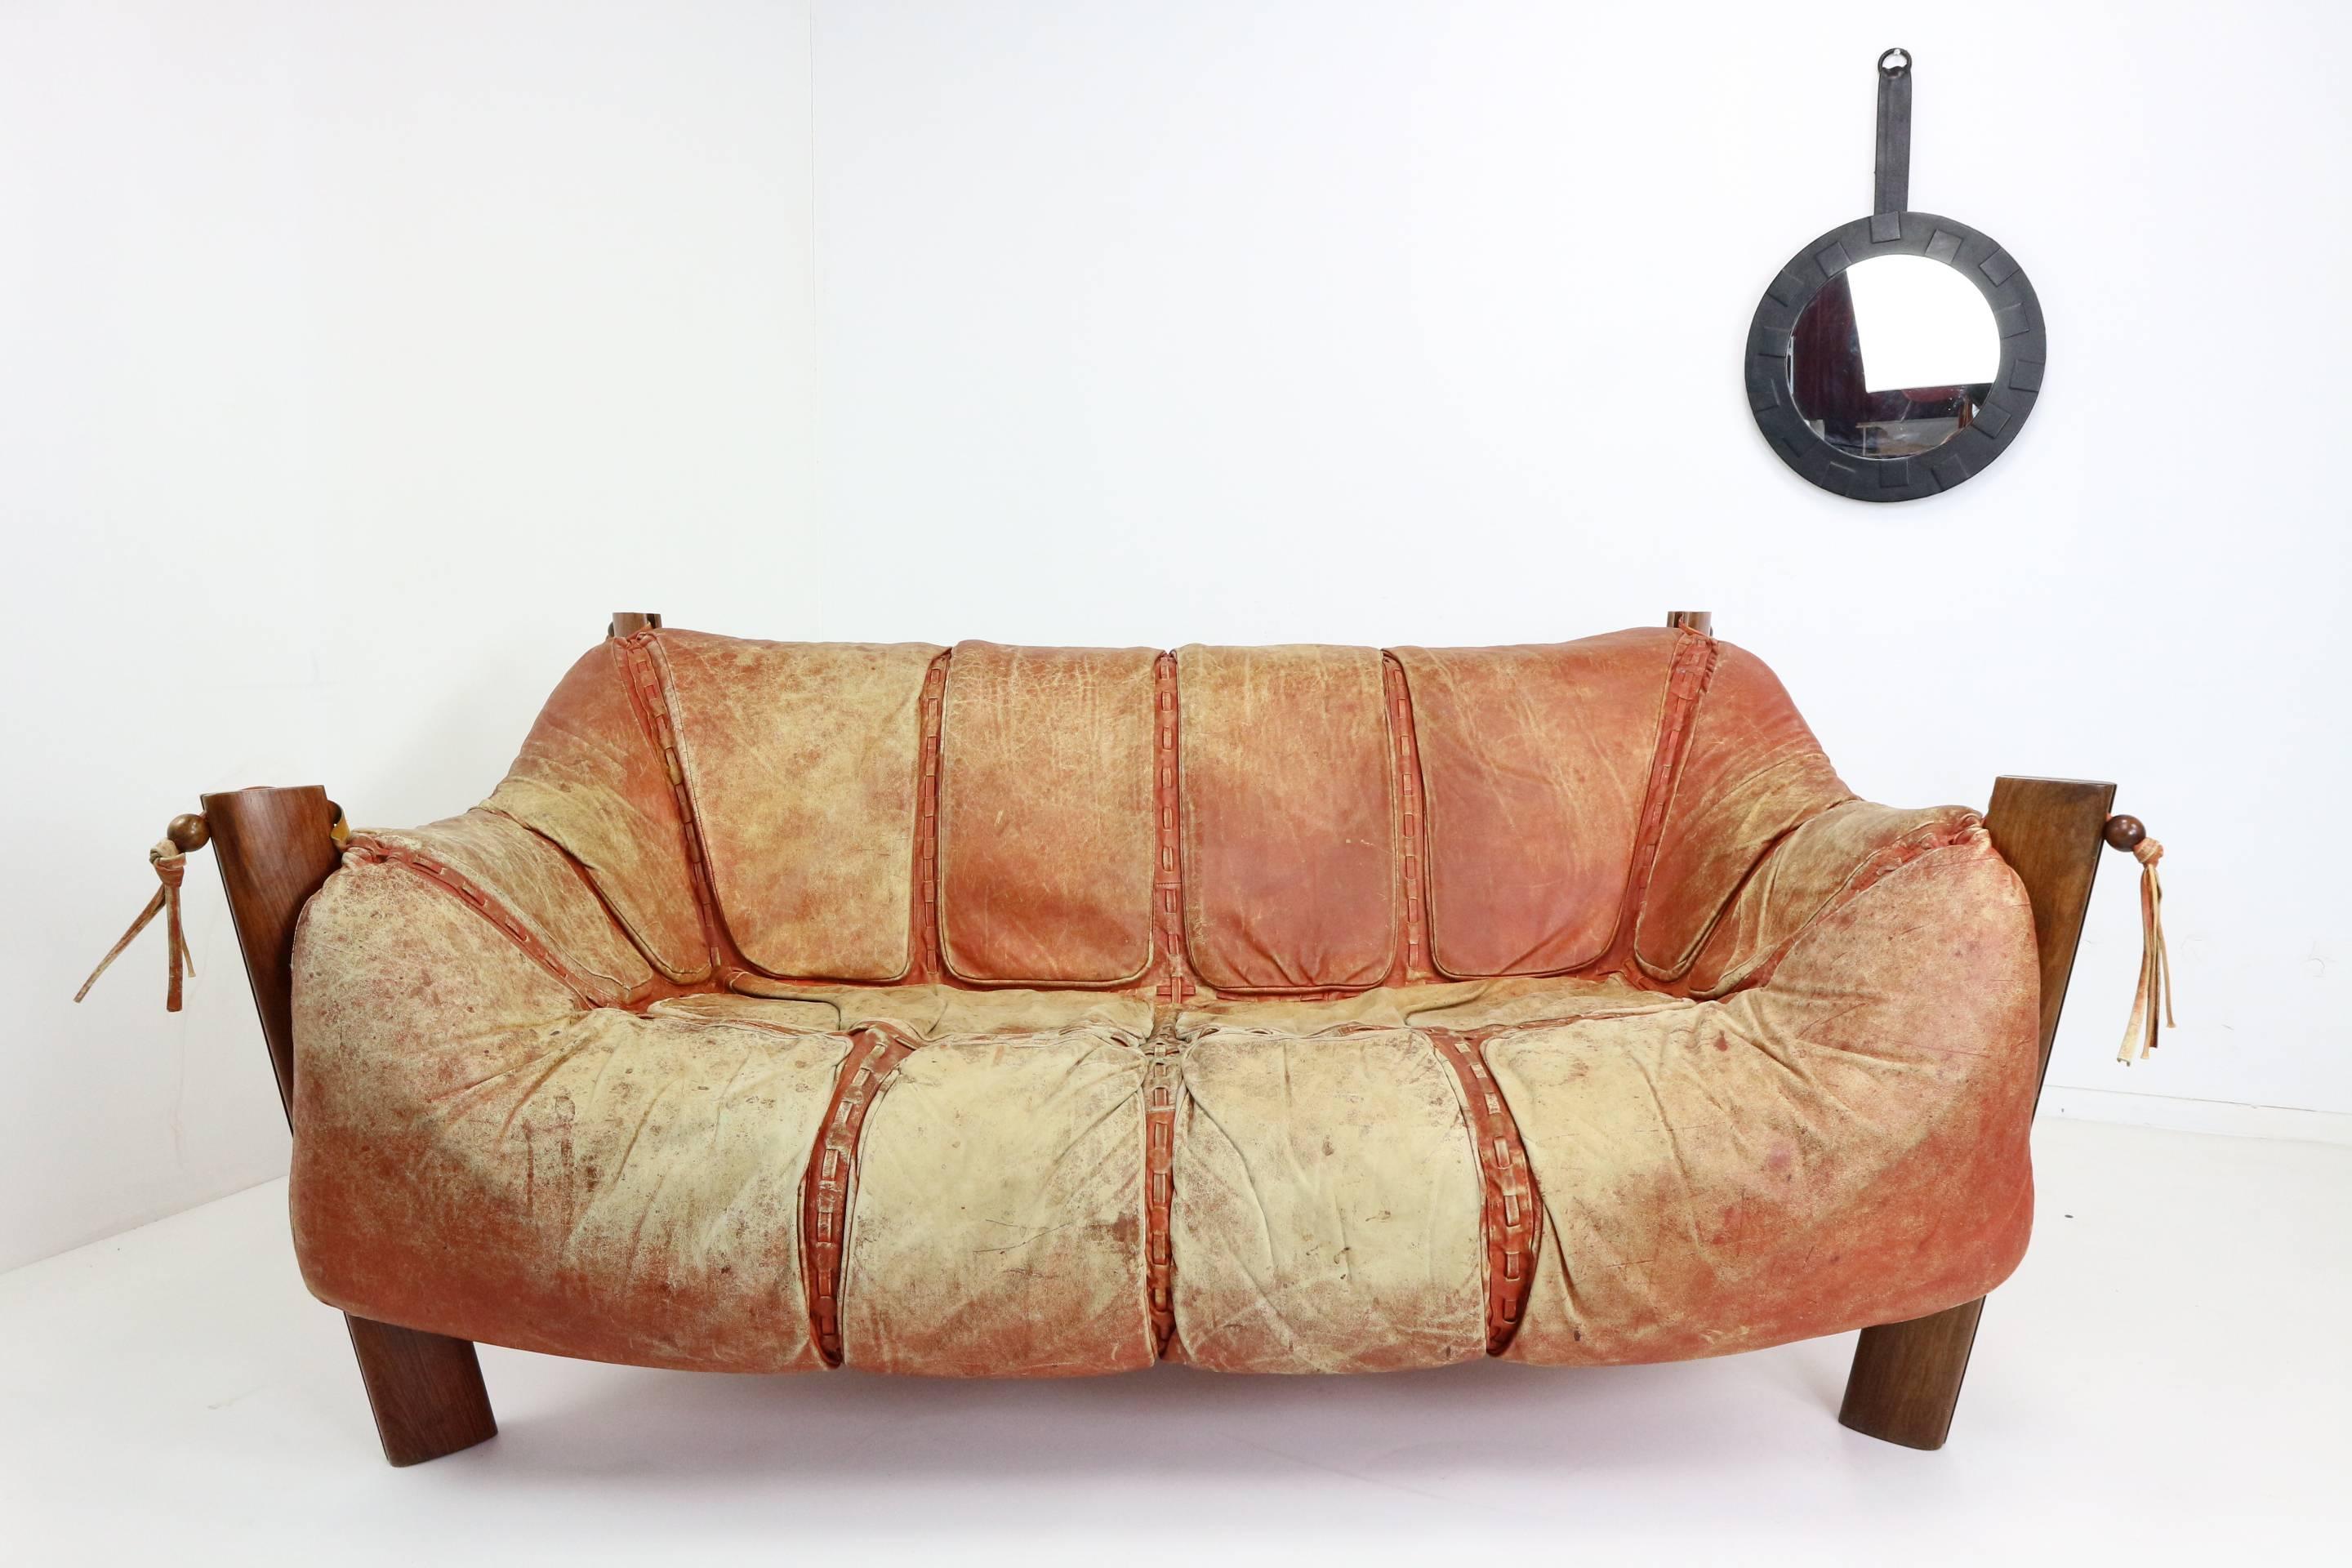 Two-seat sofa by Brazilian designer Percival Lafer. Real leather, in red and the seating hangs in a Jacaranda wood base. Decorated with leather laces which ends in a connection to the frame and the seating, finished with beautiful rosewood